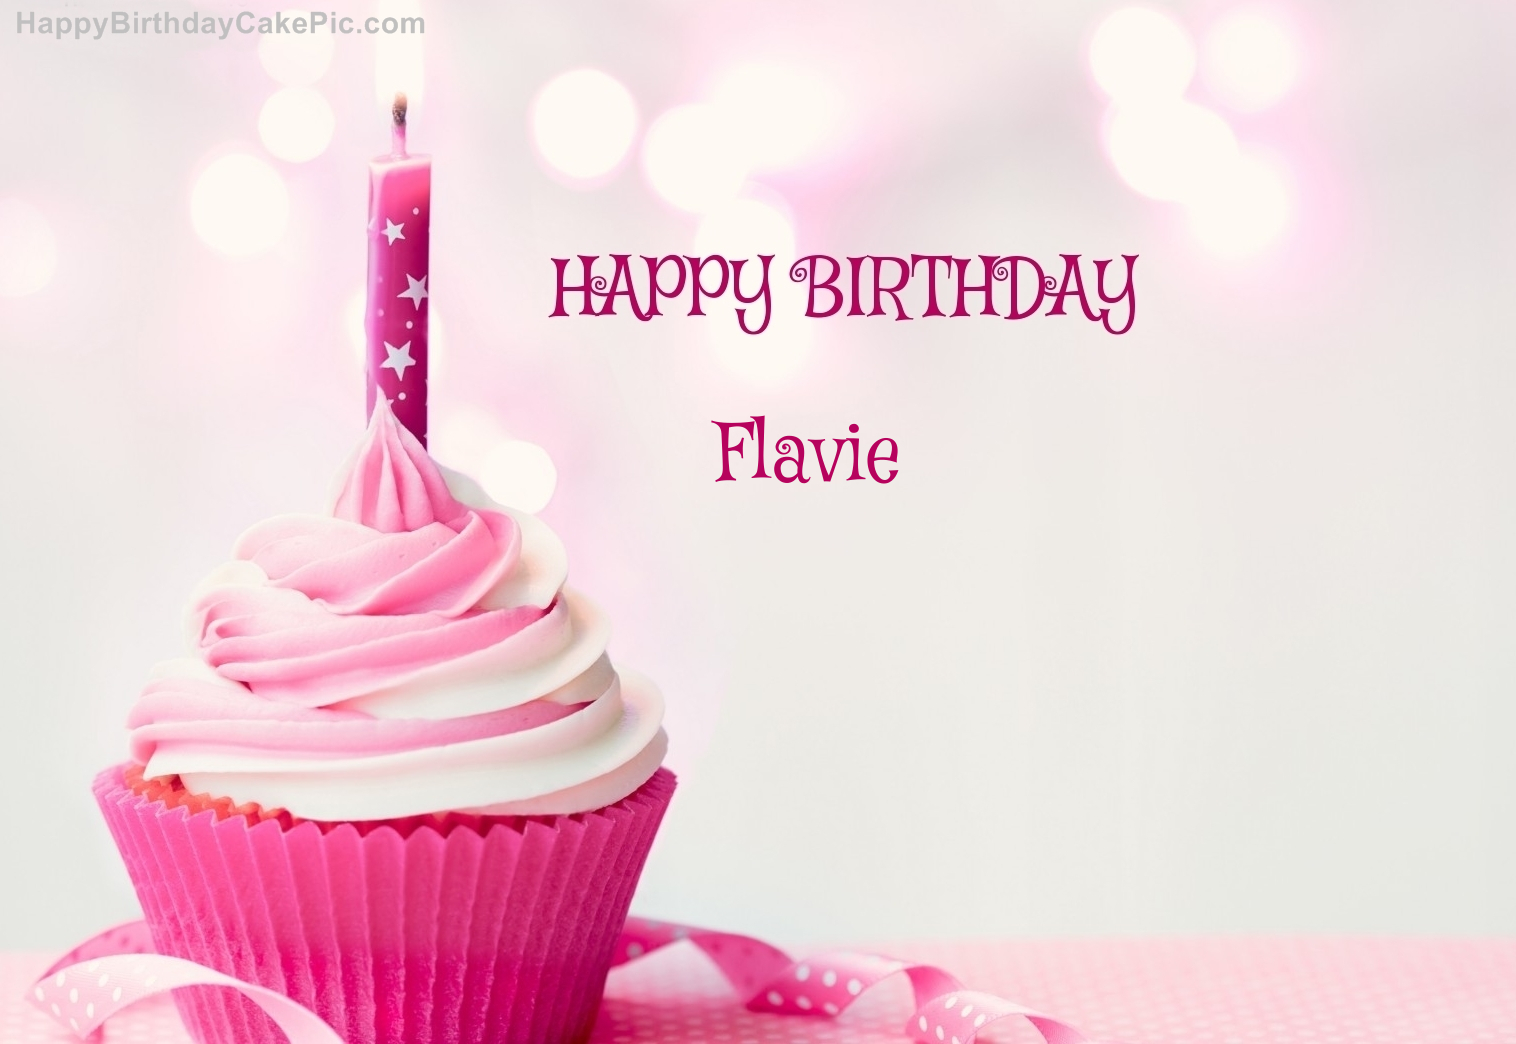  Happy Birthday Cupcake Candle Pink Cake For Flavie 